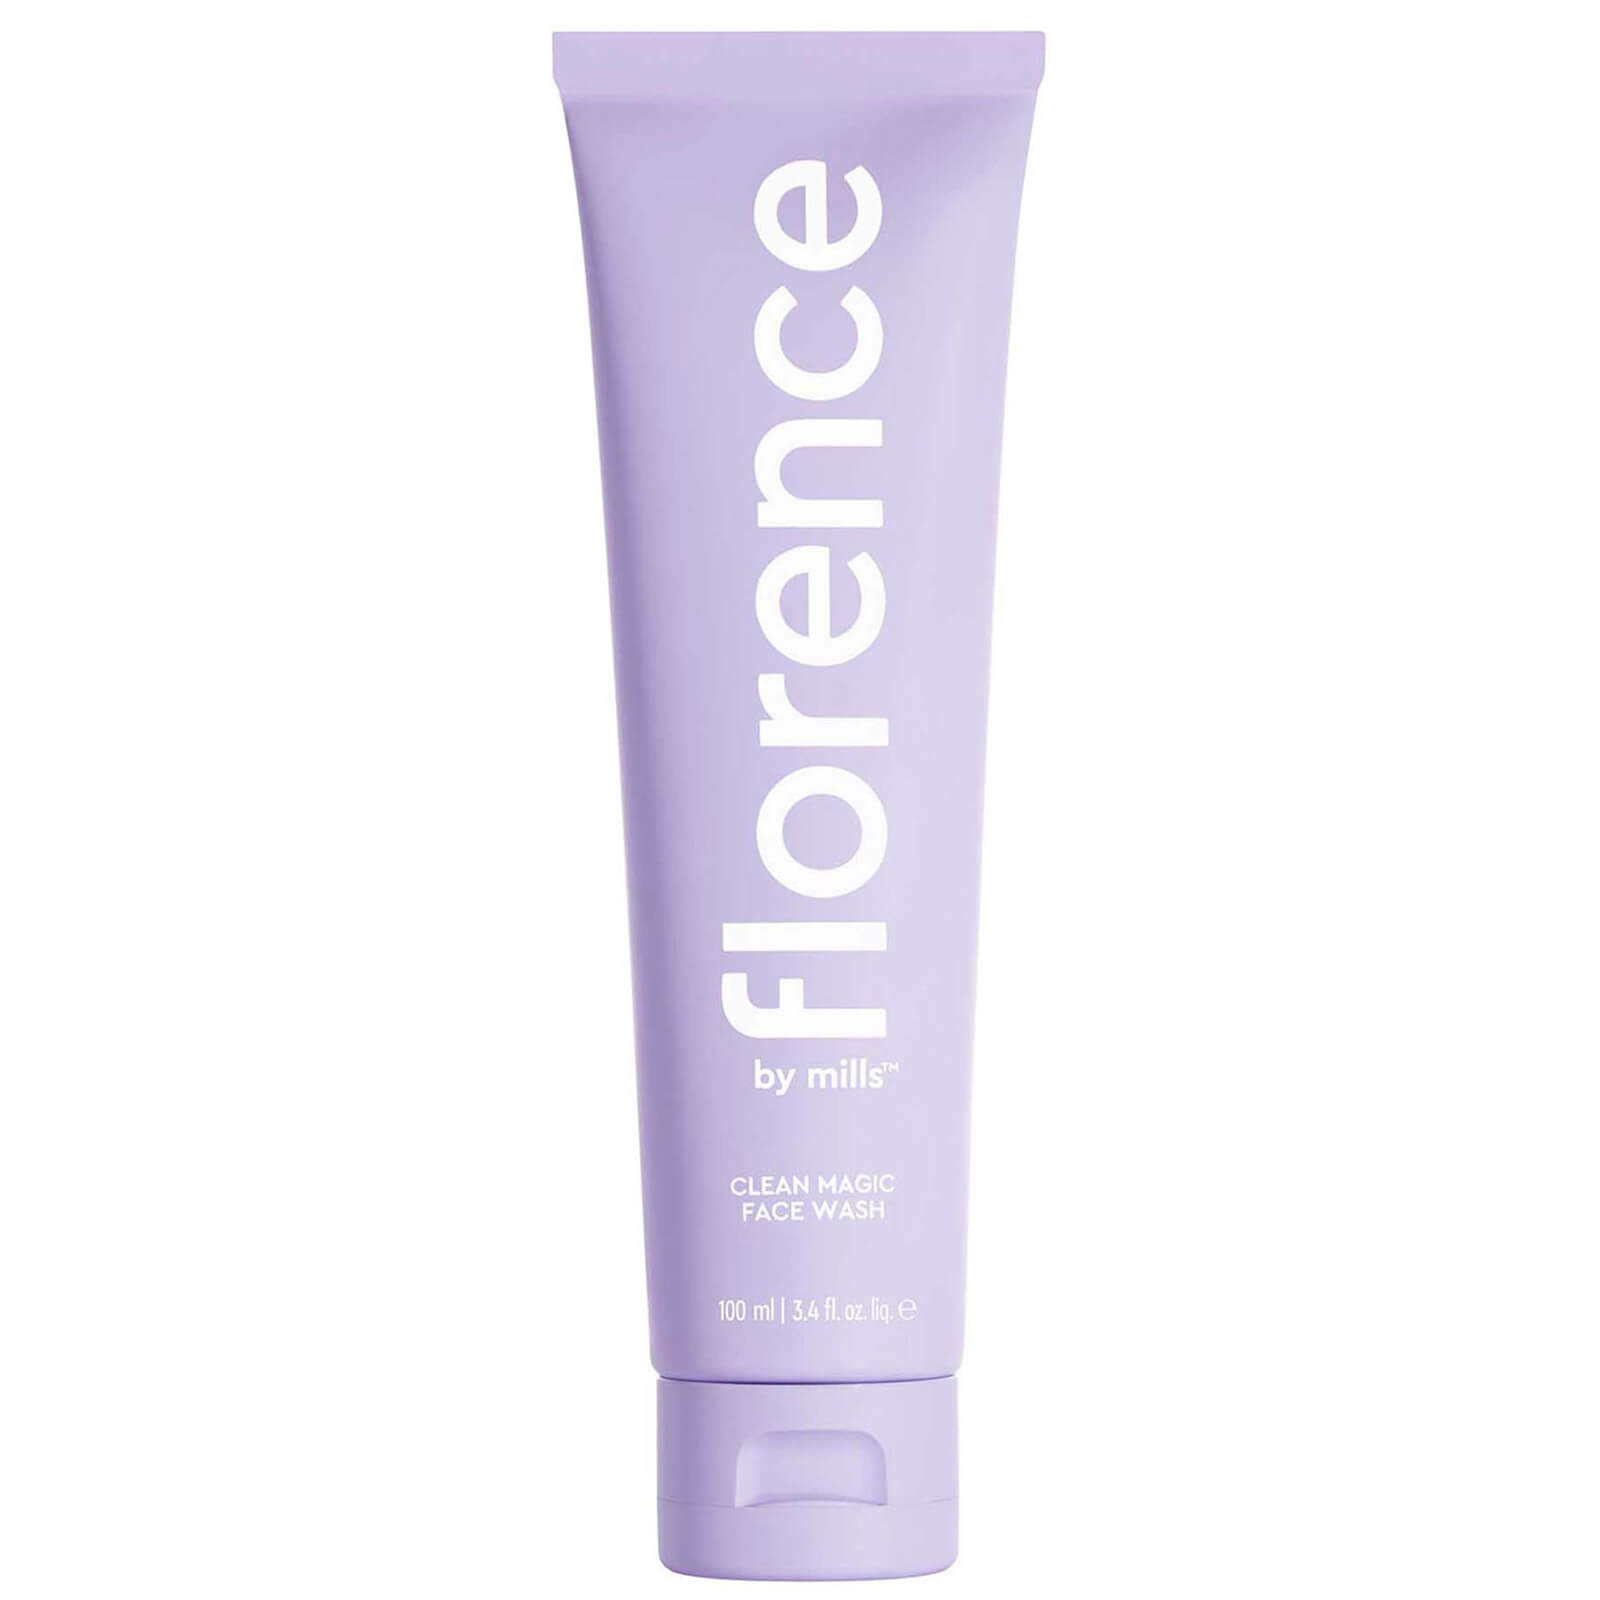 Florence by Mills Clean Magic Face Wash 100ml lookfantastic.com imagine